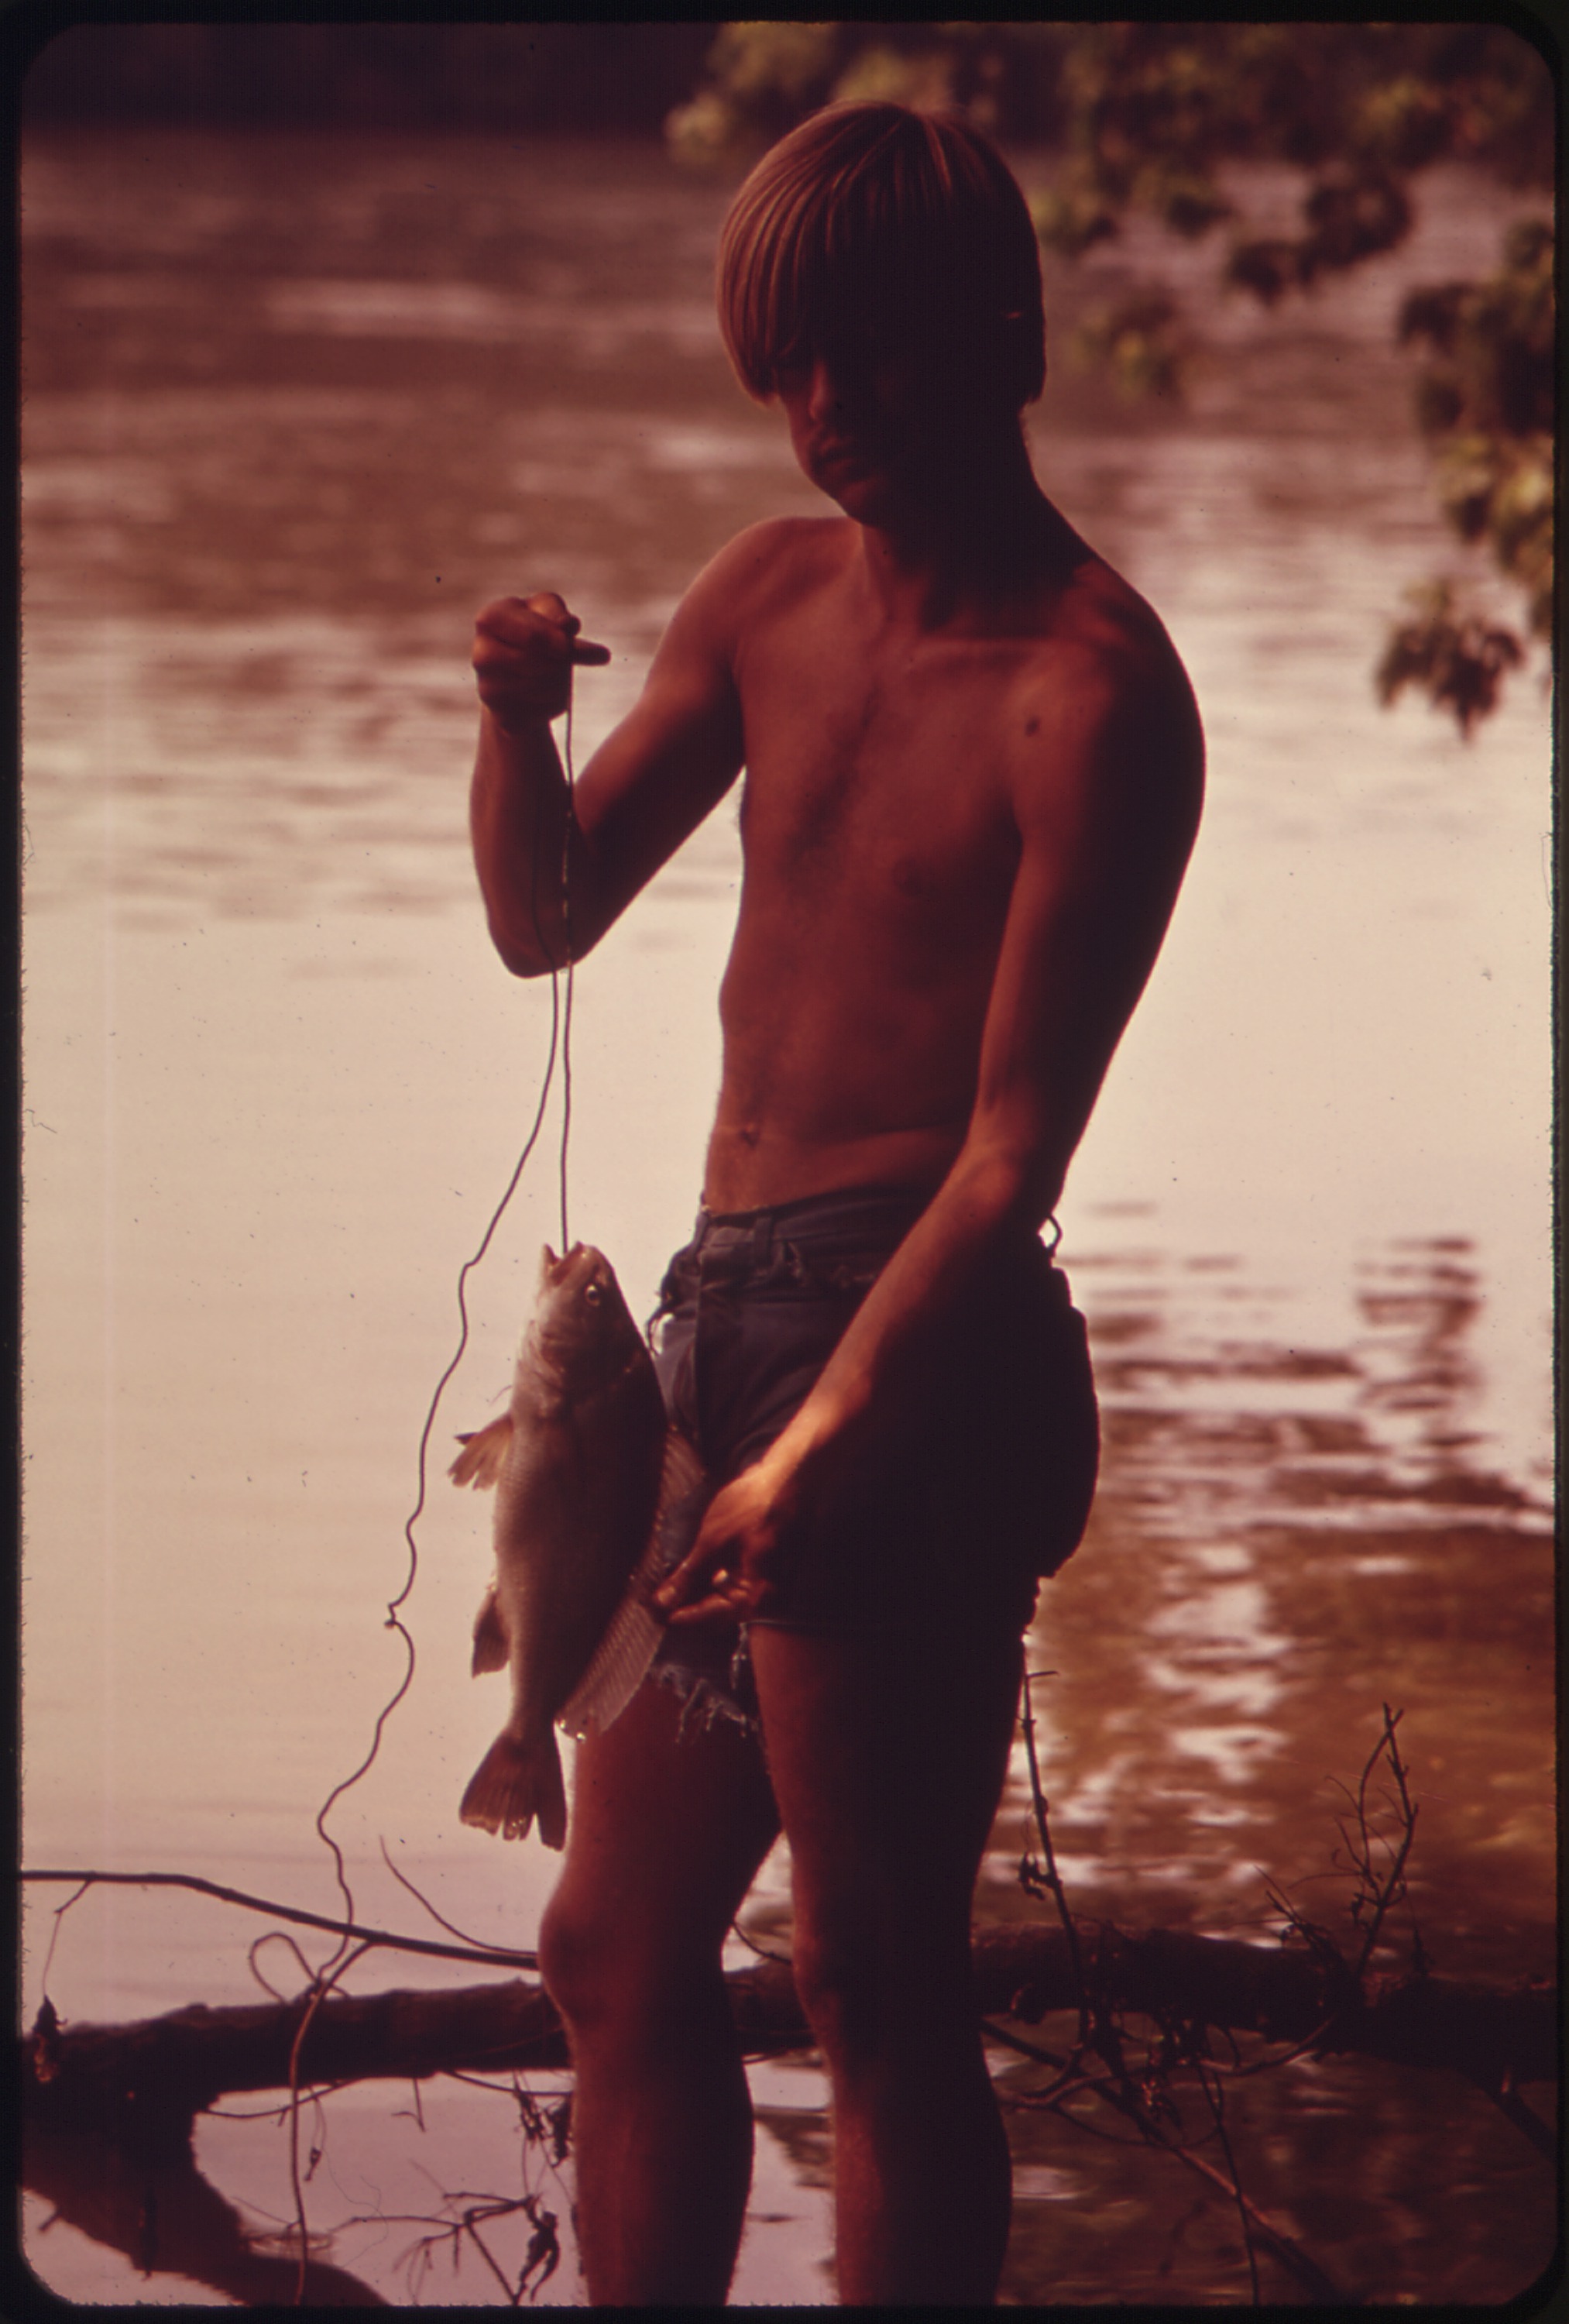 File:A YOUNG FISHERMAN SHOWS OFF THE LARGE PERCH HE CAUGHT IN THE ...